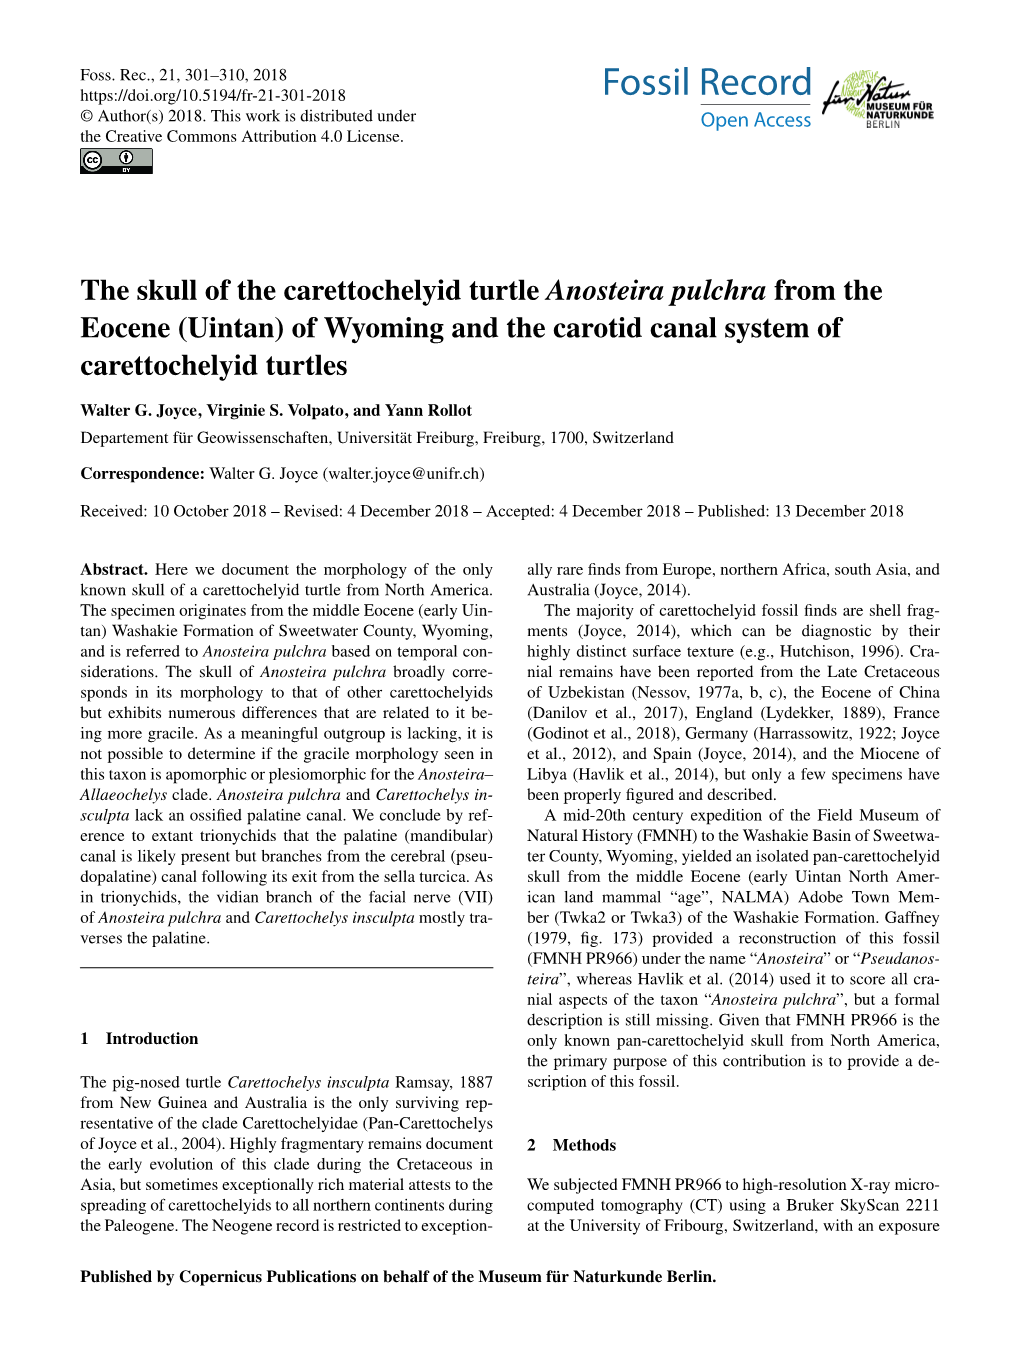 The Skull of the Carettochelyid Turtle Anosteira Pulchra from the Eocene (Uintan) of Wyoming and the Carotid Canal System of Carettochelyid Turtles